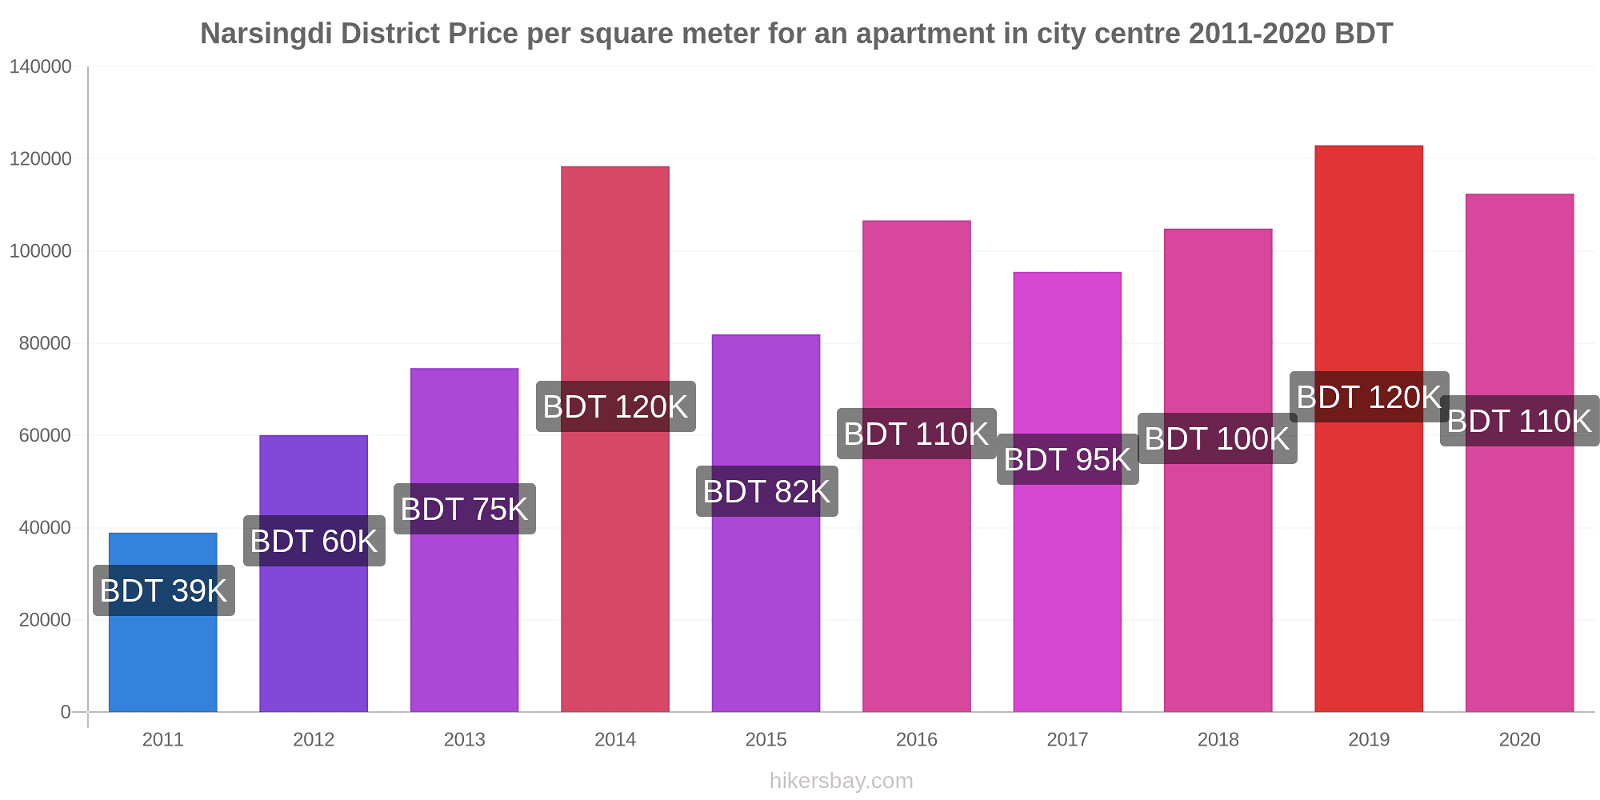 Narsingdi District price changes Price per square meter for an apartment in city centre hikersbay.com